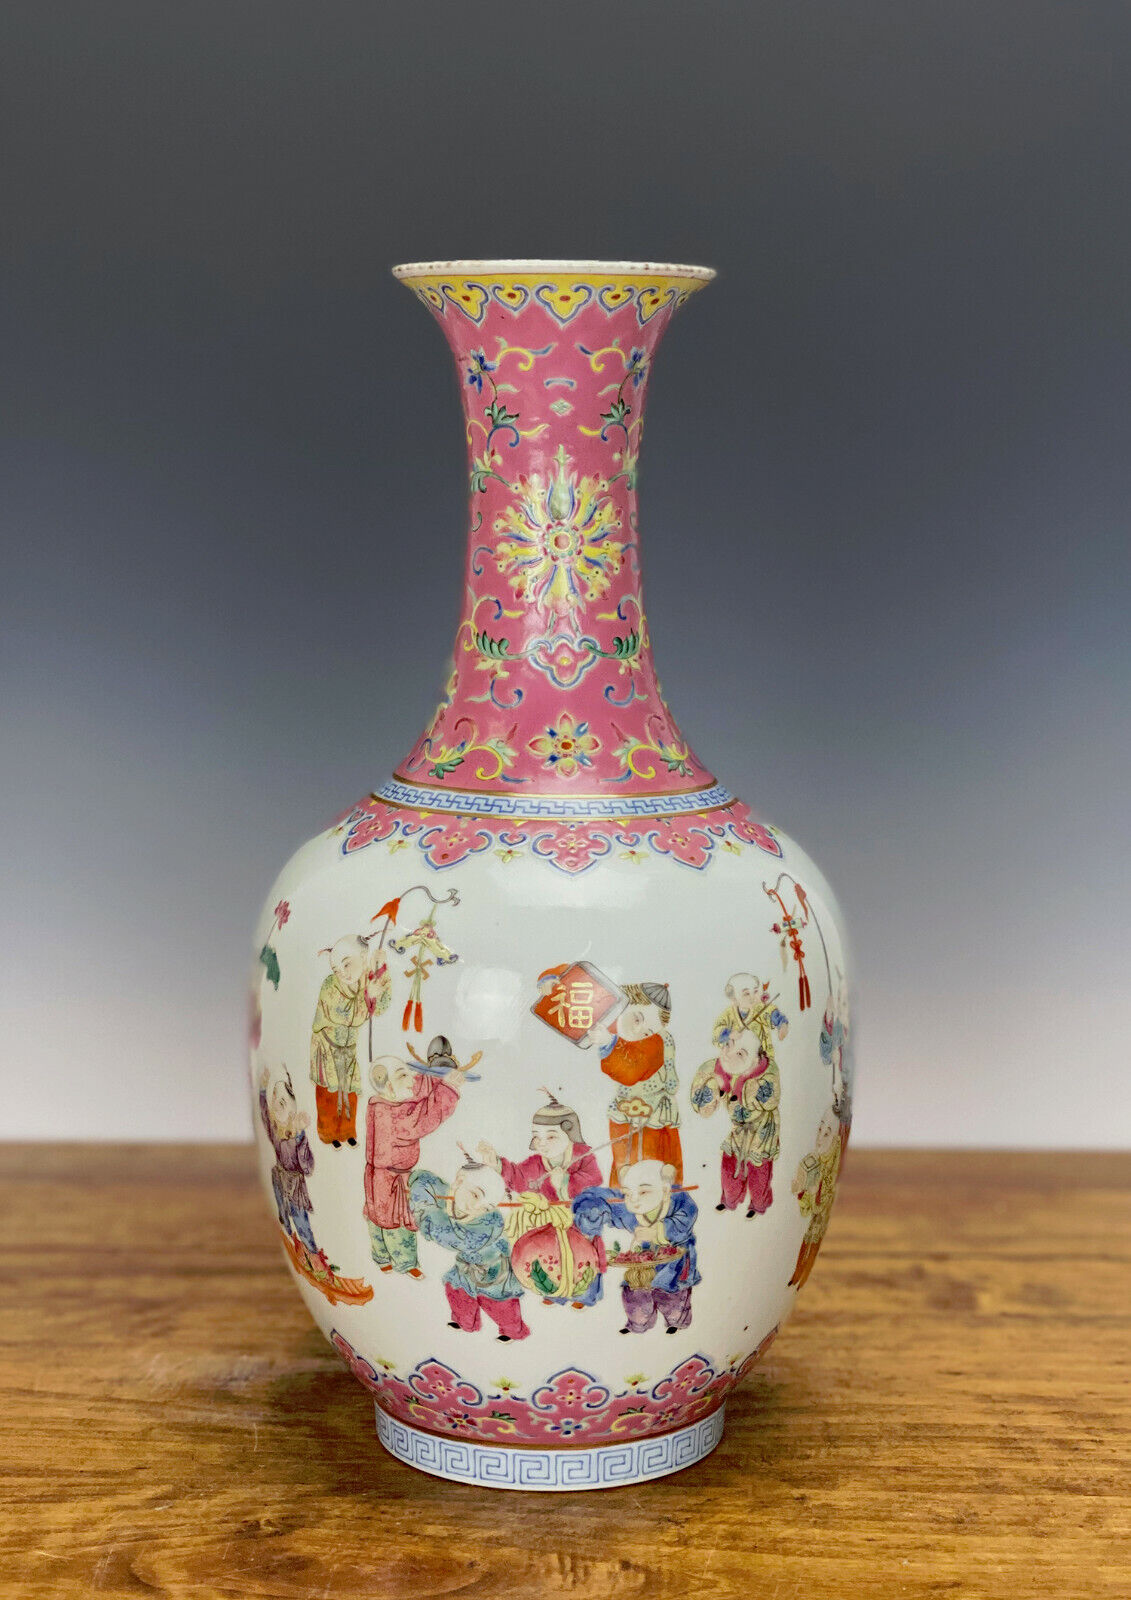 Museum Quality Chinese Qing Daoguang MK Famille Rose Boys Playing Porcelain Vase